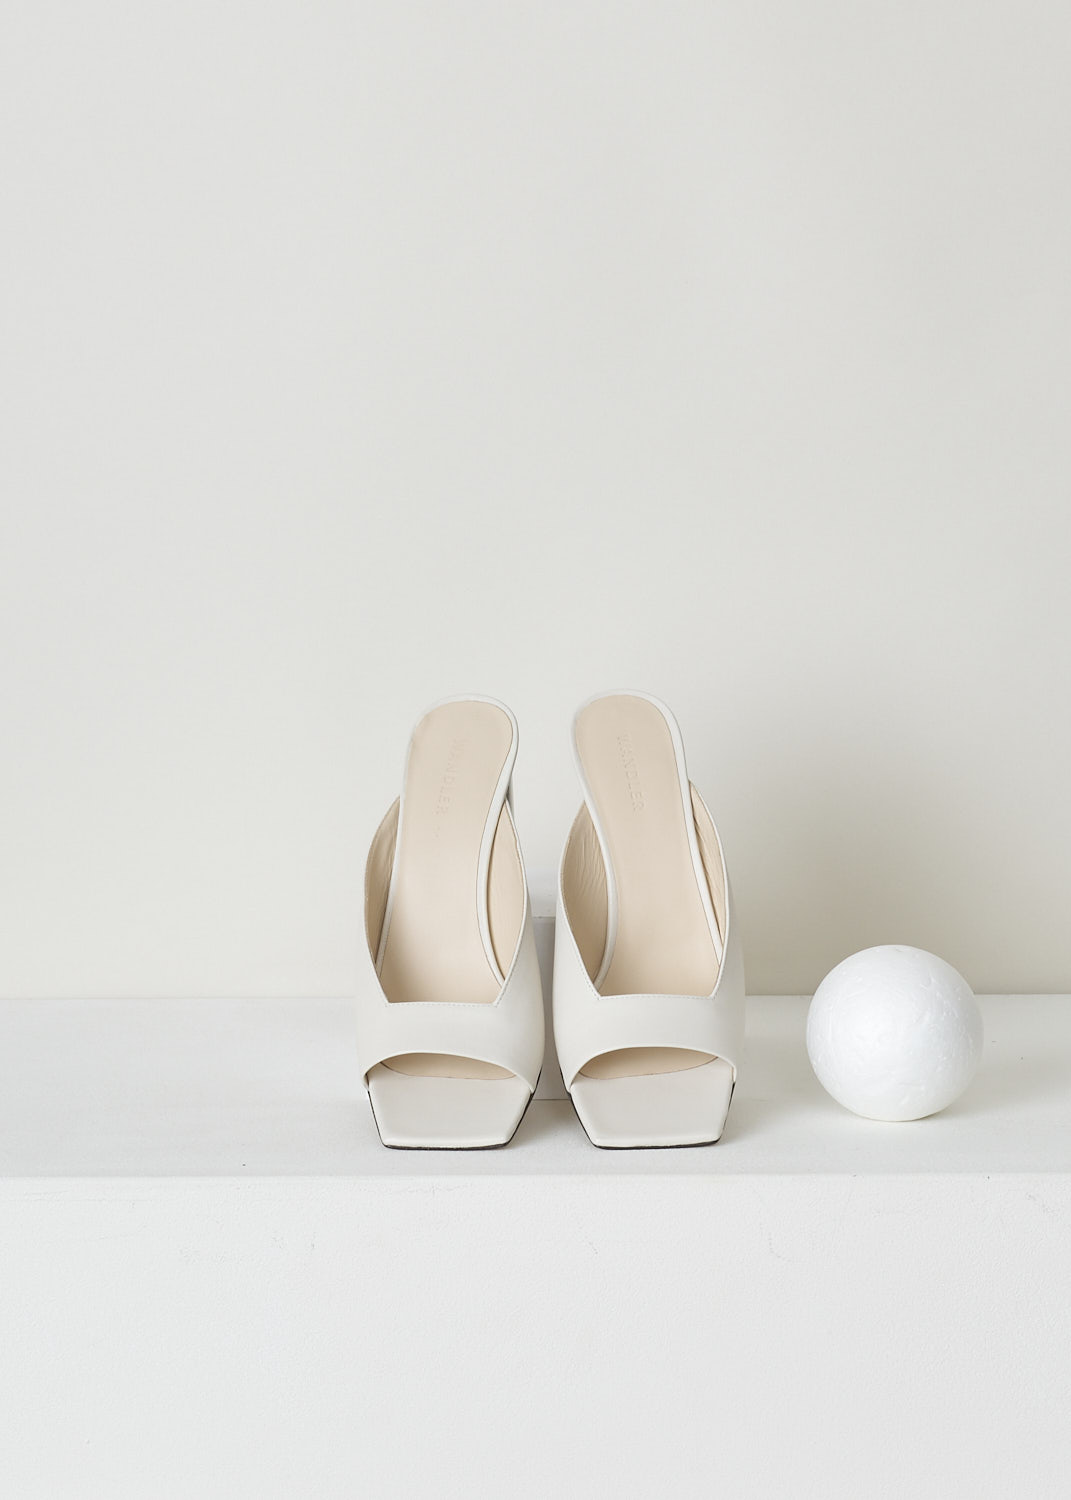 WANDLER, OFF-WHITE HEELED ISA SANDALS, 22204_101204_1082_ISA_SANDAL_DOVE_MIX, White, Top, These off-white leather slip-on sandals have a square-cut open-toe and a rectangular block heel.
